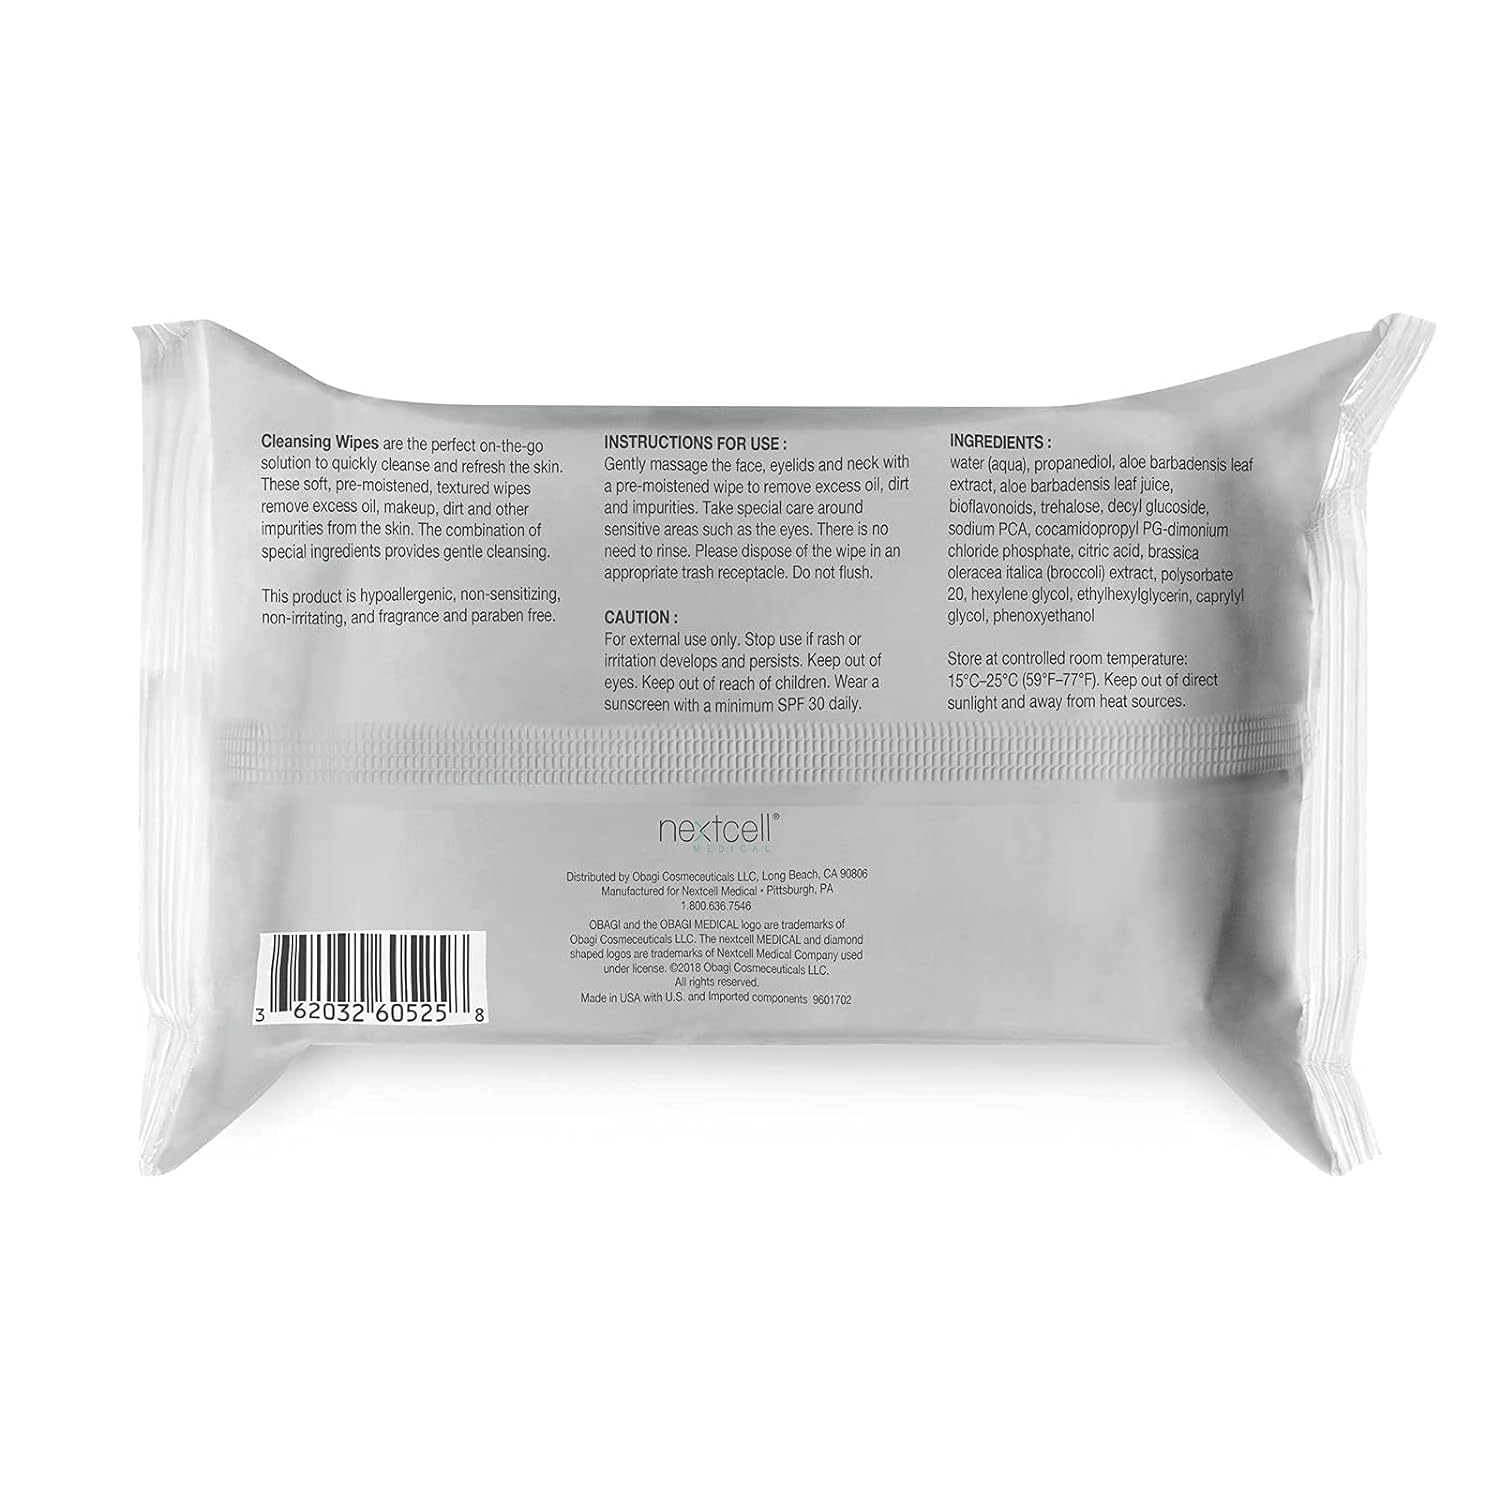 Obagi Medical On the Go Cleansing and Makeup Removing Wipes, 25 count : Beauty & Personal Care